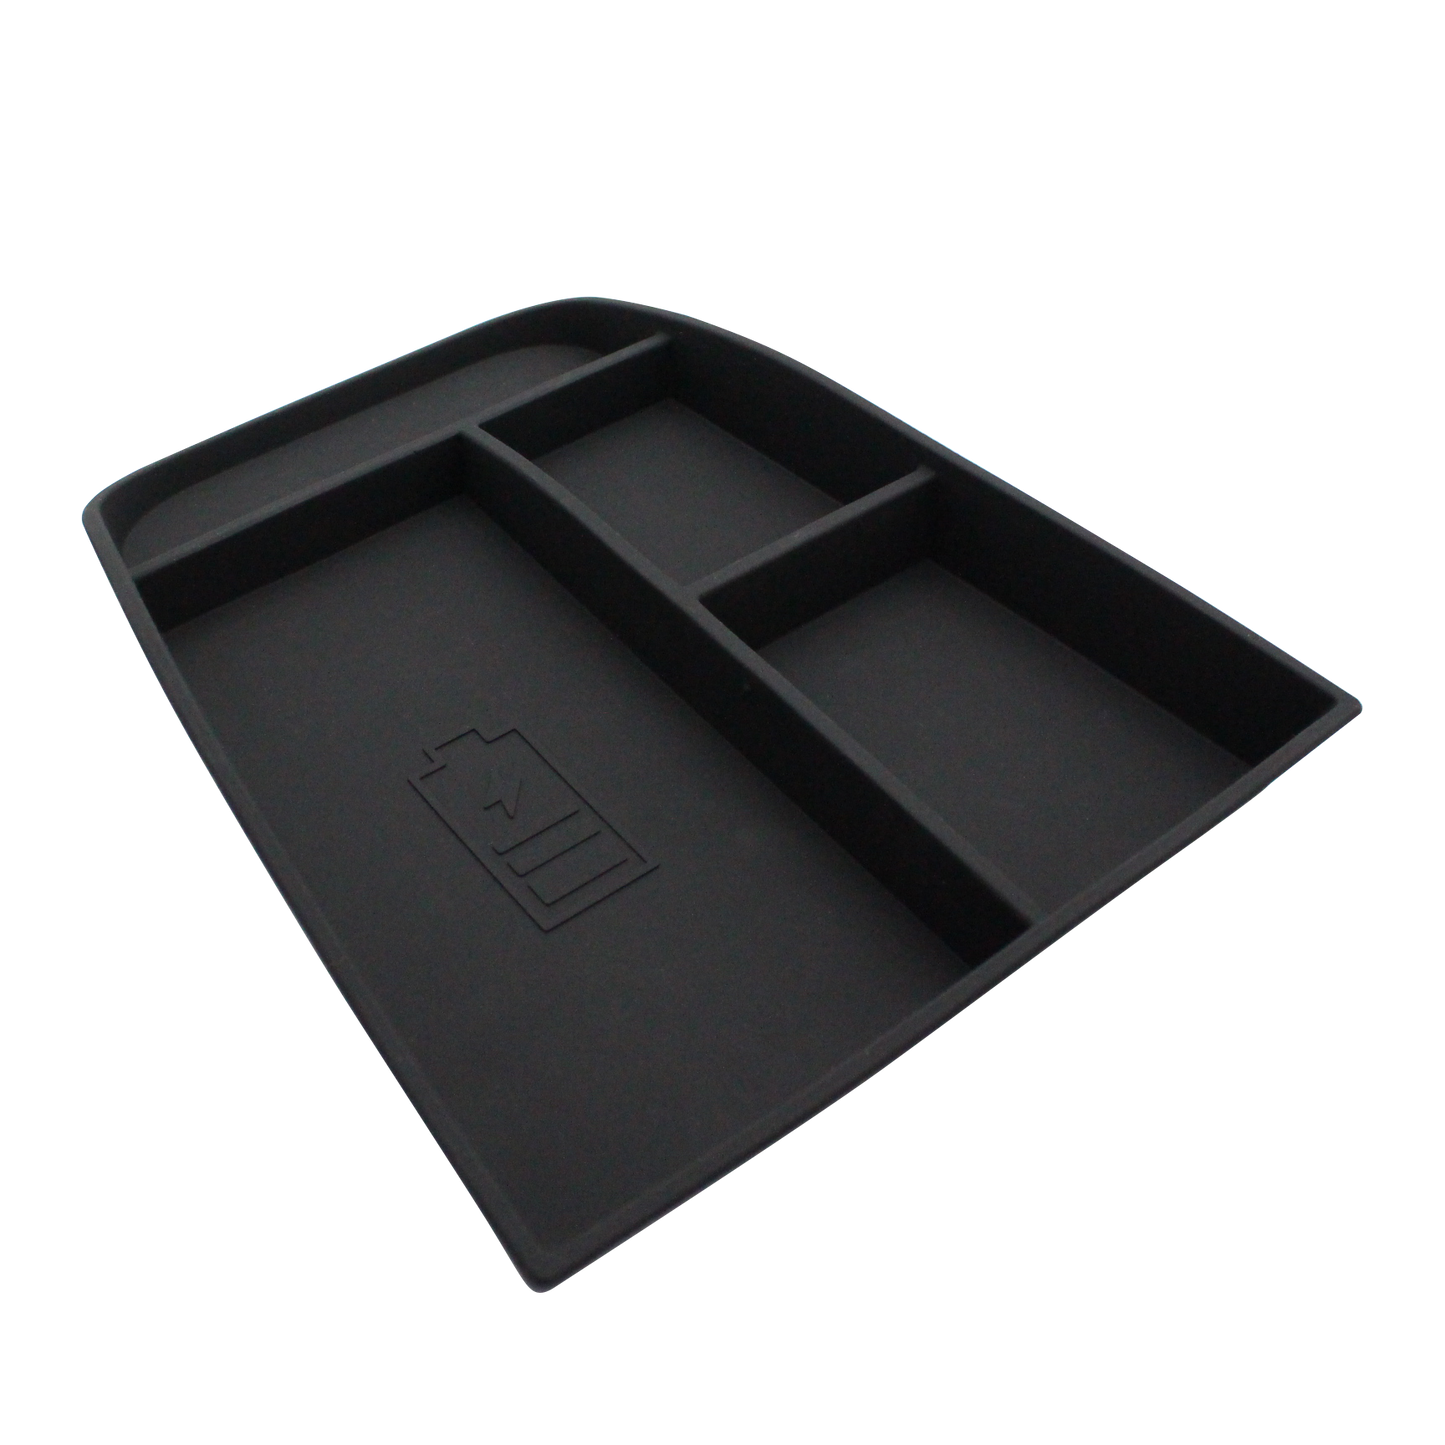 Mach E Wireless Charger Silicone Replacement Tray from AOSK